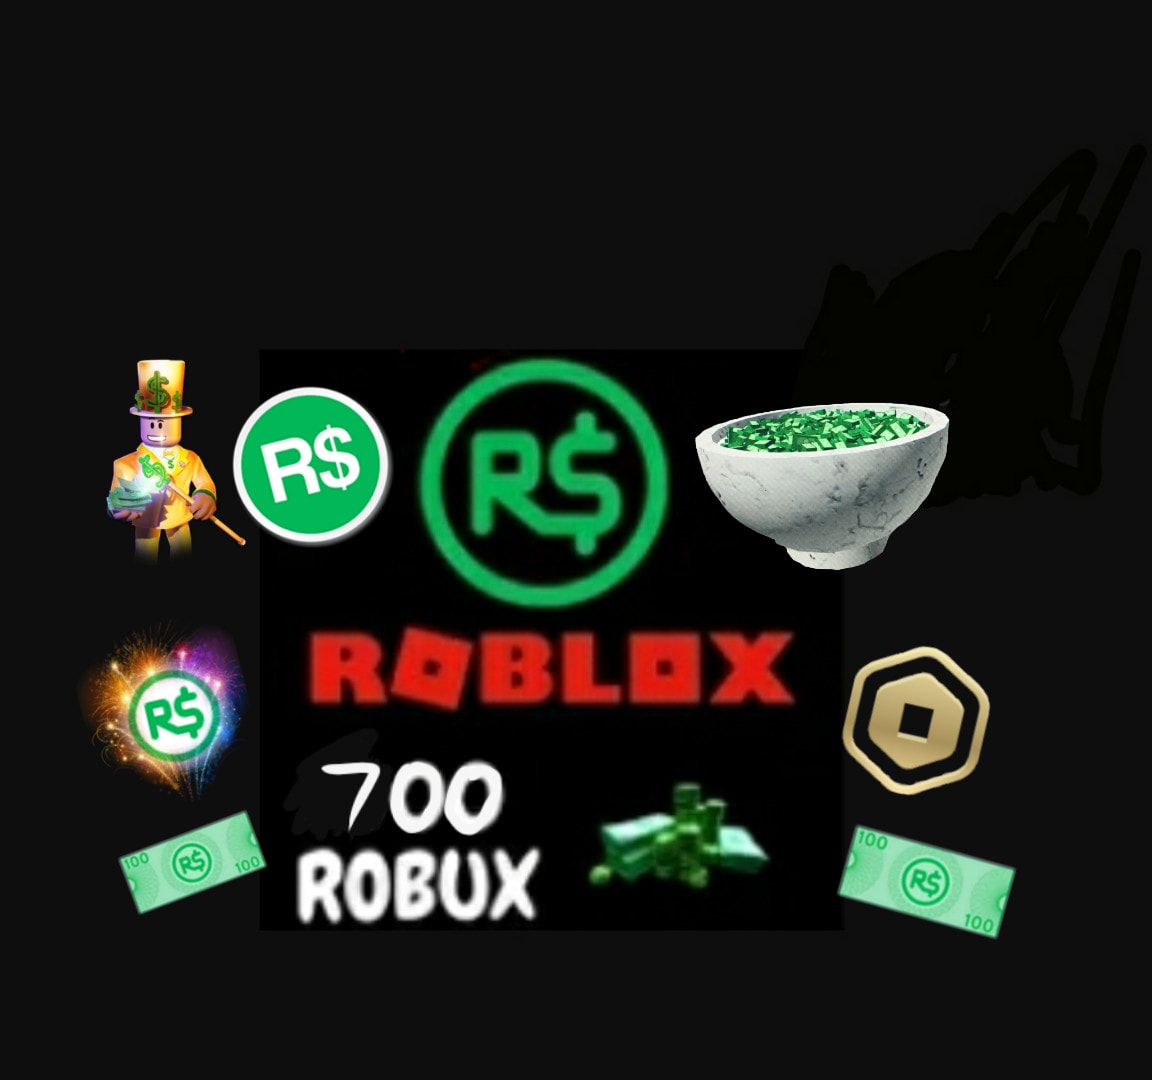 Sell You Robux For Cheaper By Texzzz - where can i buy robux for cheap